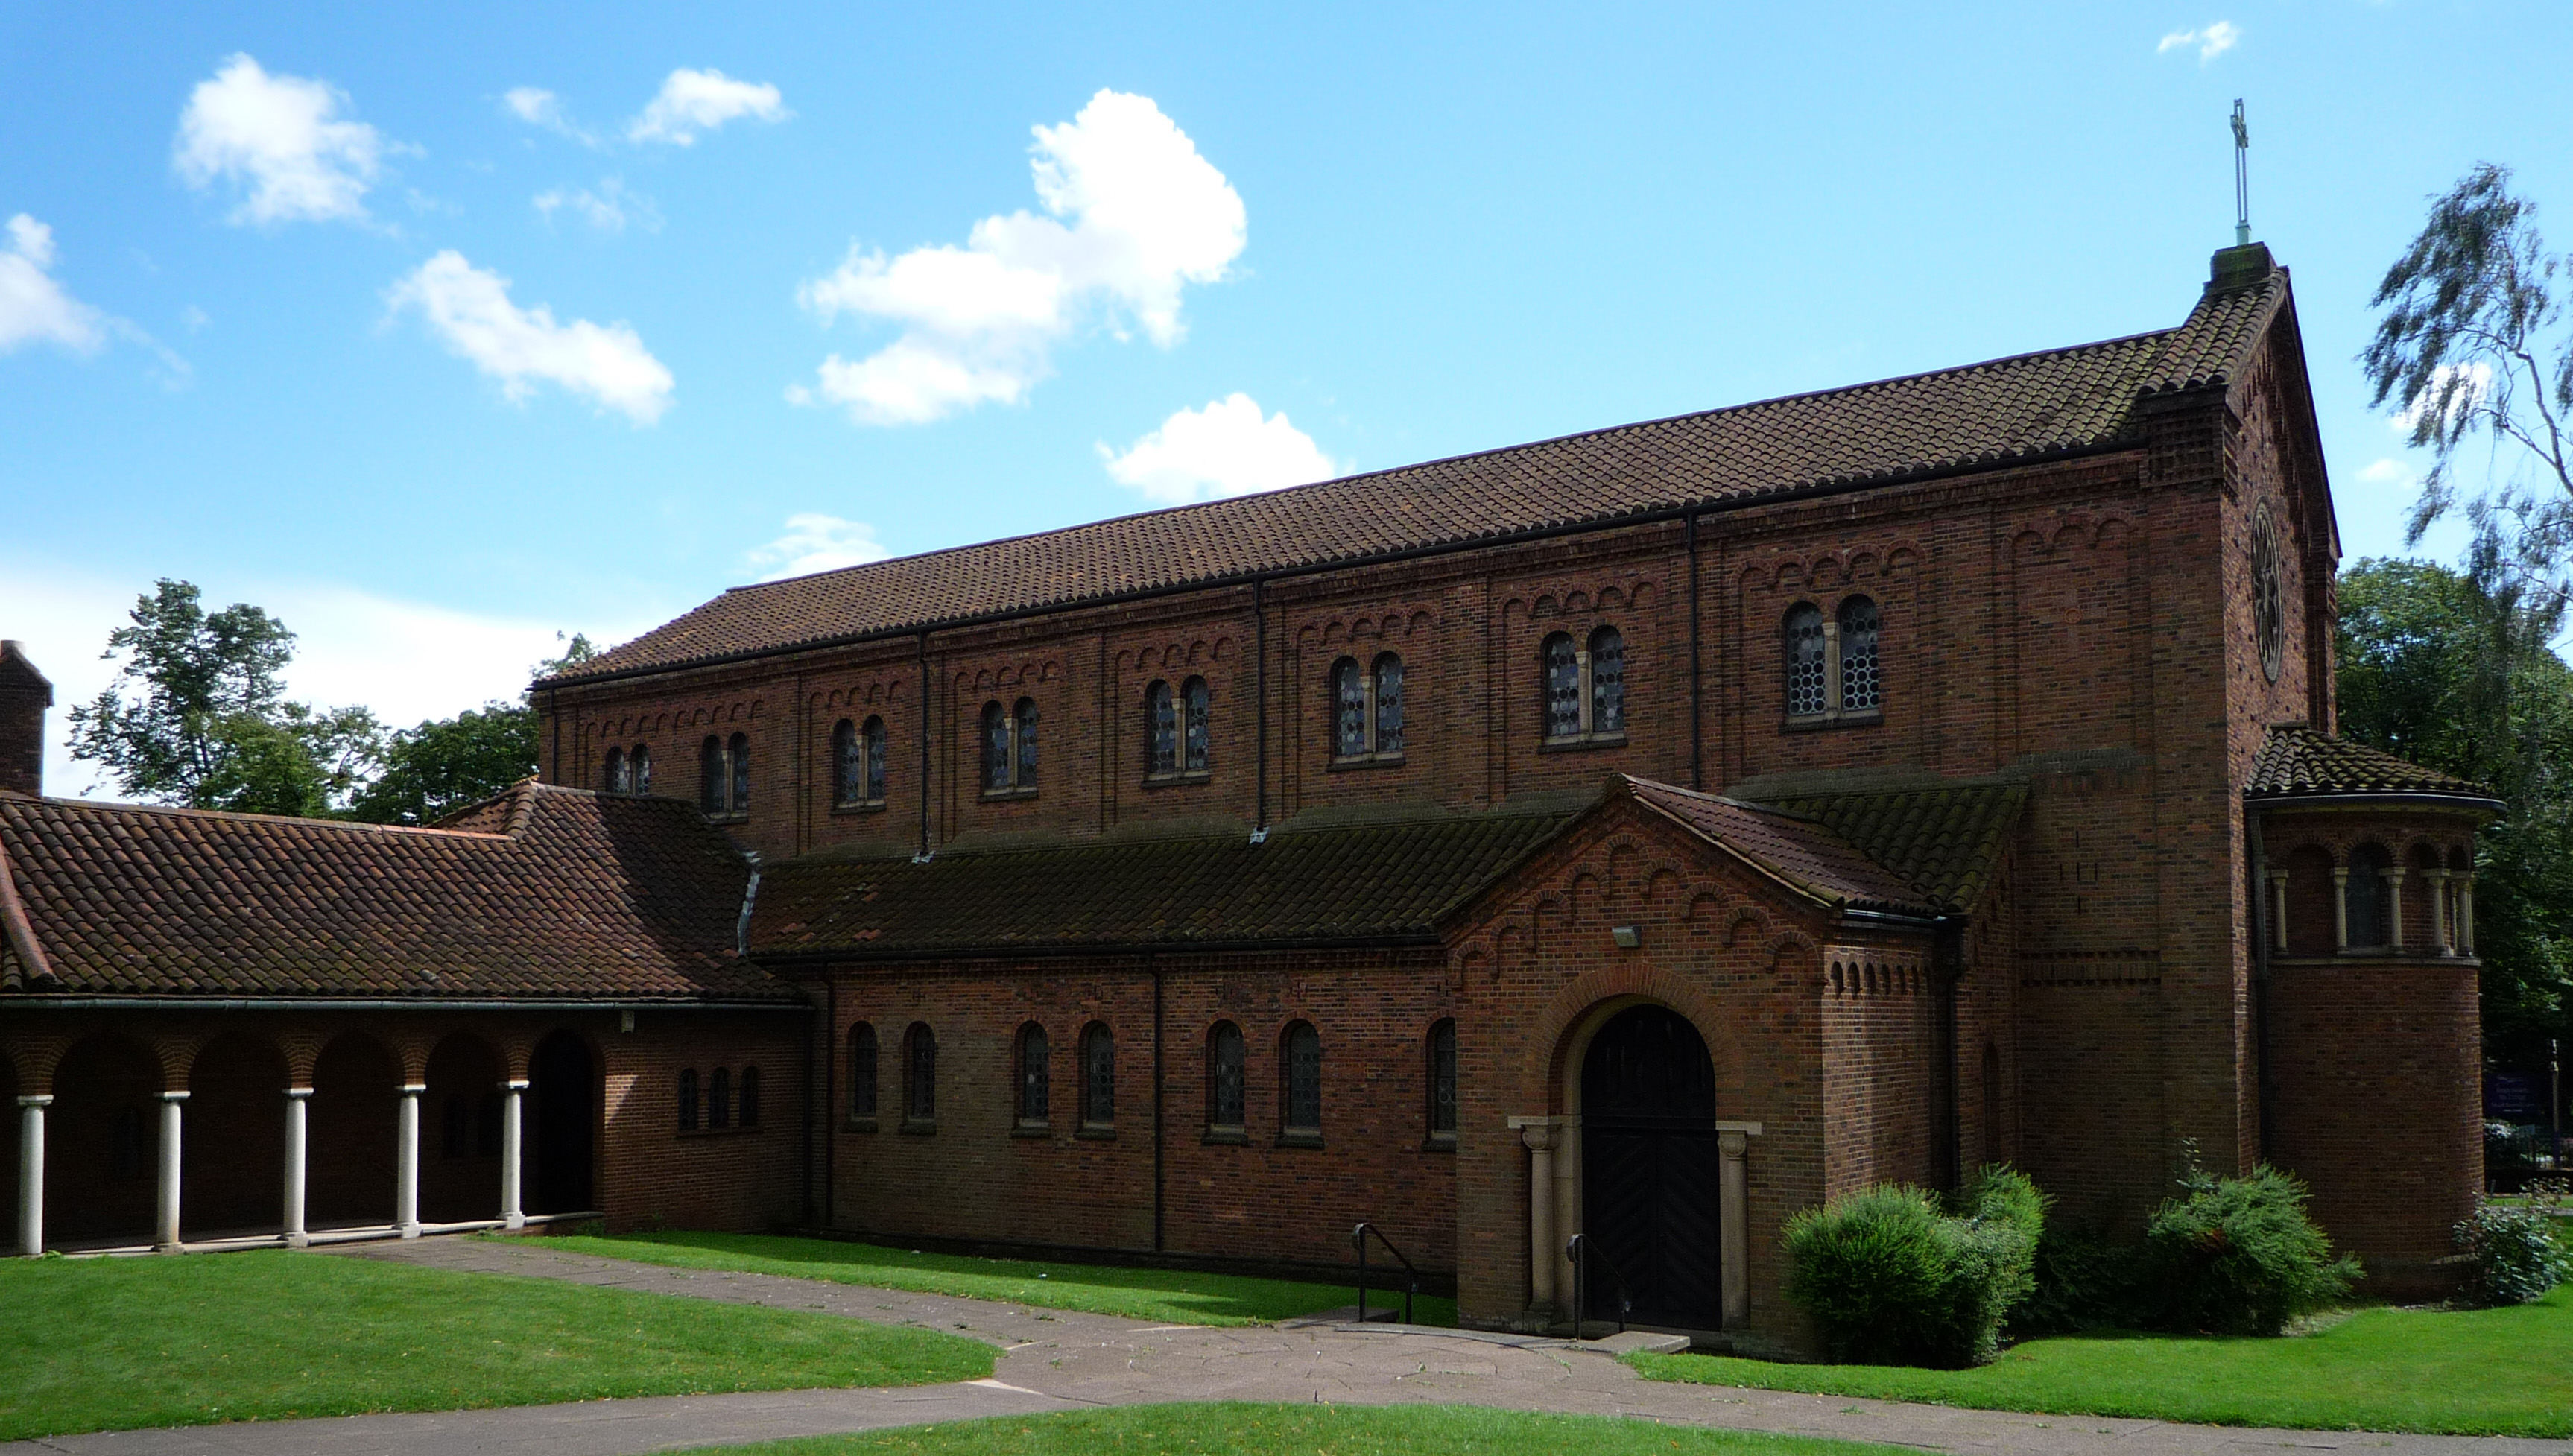 St Francis of Assisi's Church, Bournville